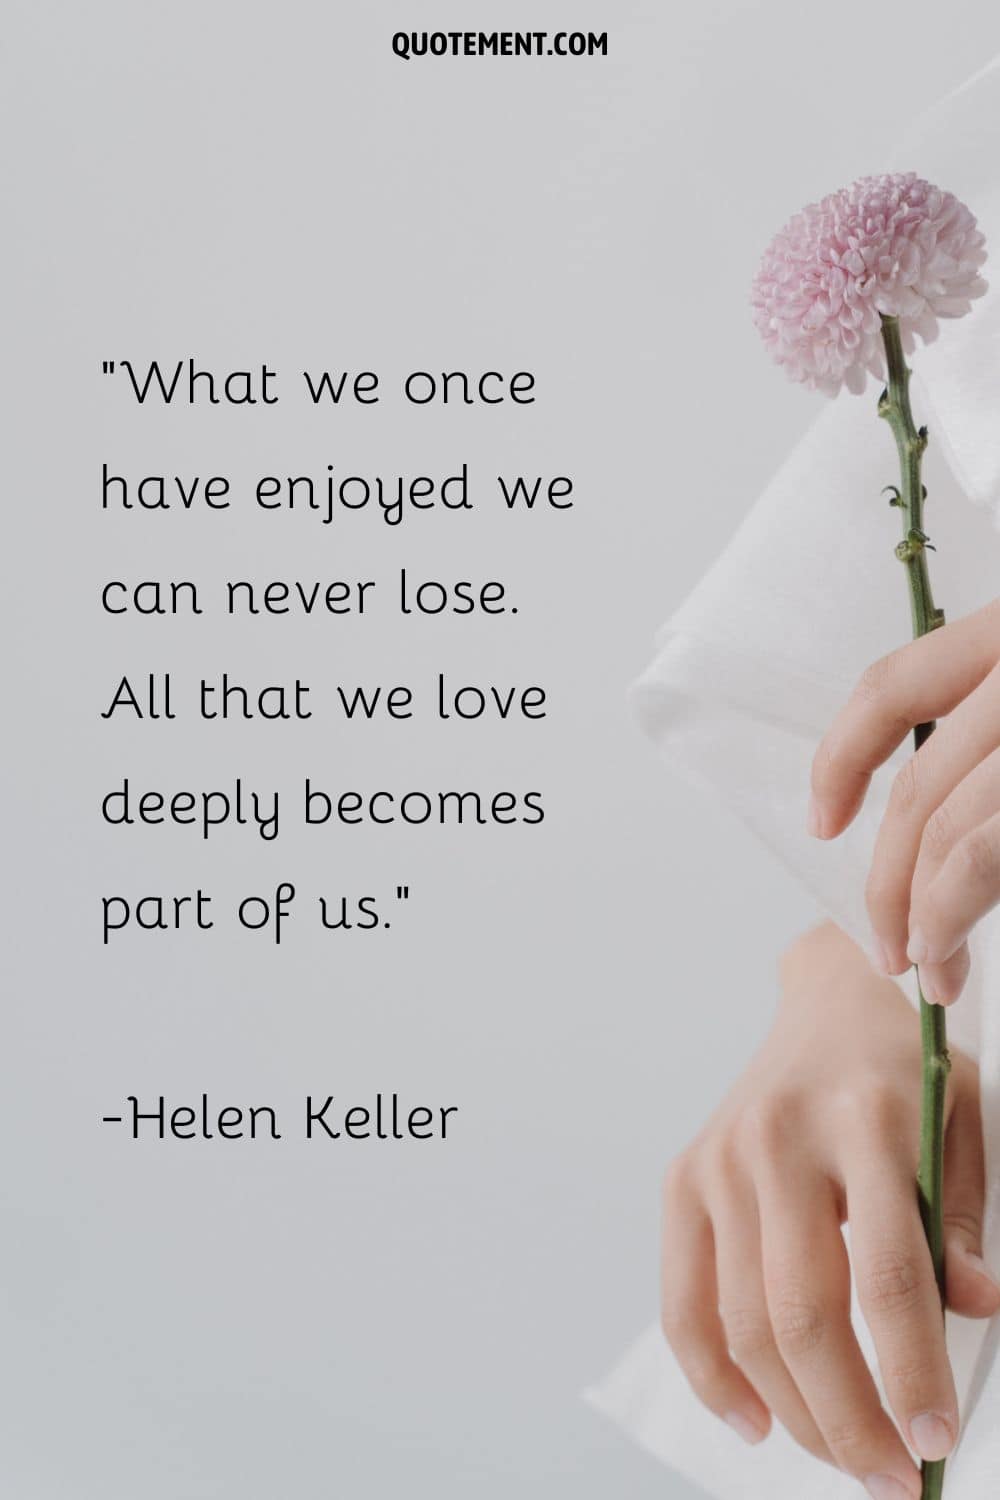 What we once have enjoyed we can never lose. All that we love deeply becomes part of us.